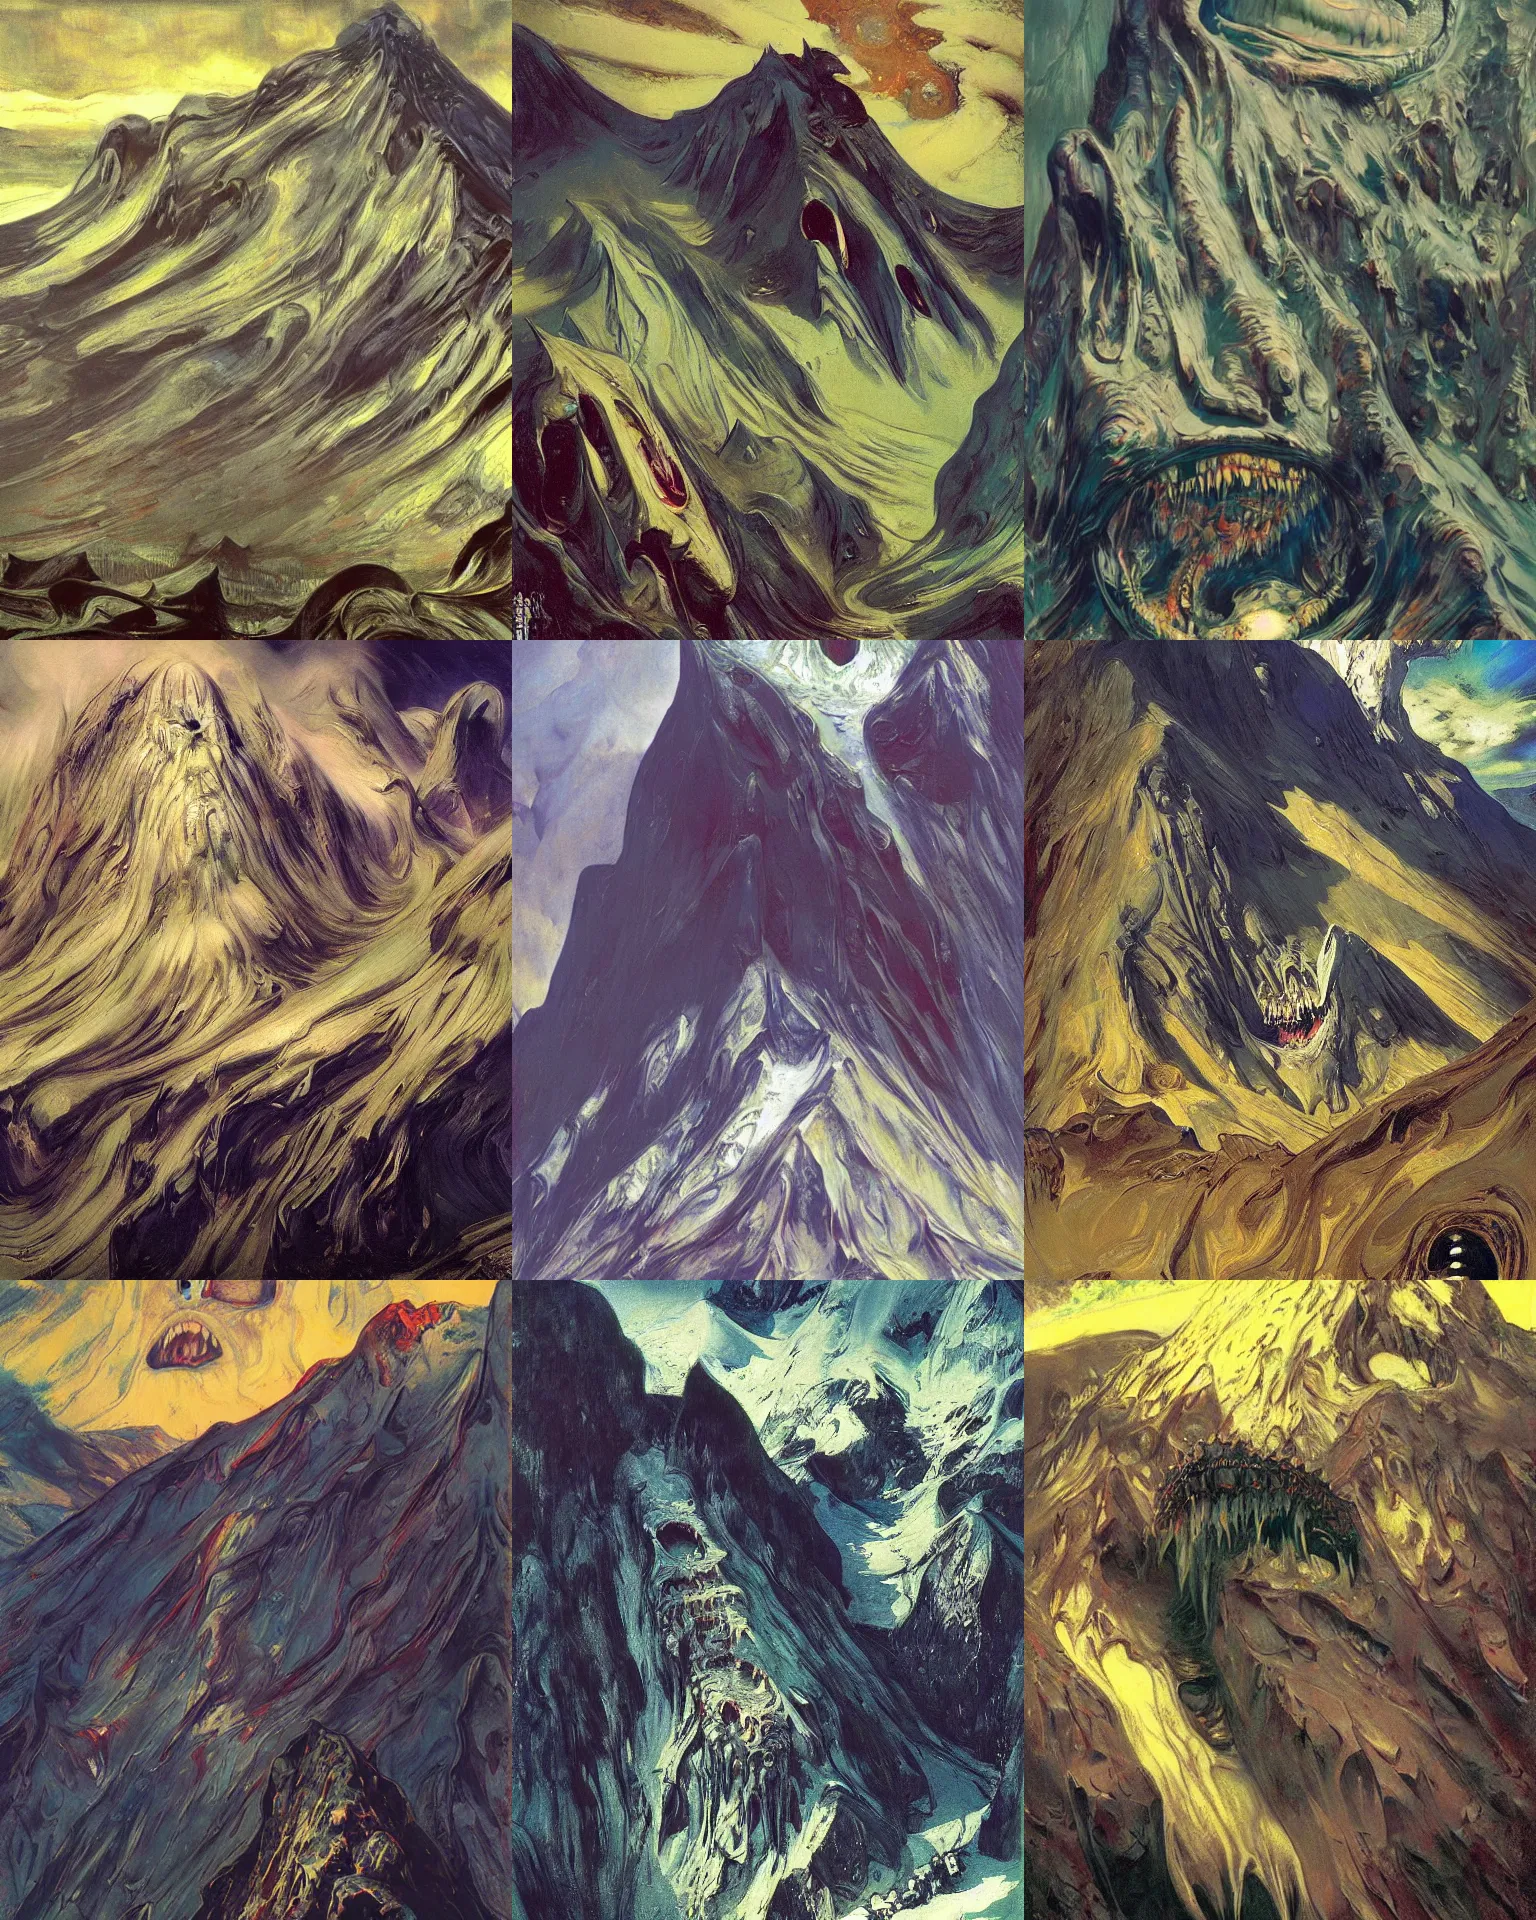 Prompt: a mountain with a gaping mouth full of teeth, painting by donato giancola, john berkey, edvard munch, dore, thomas moran, jackson pollock, hp lovecraft, paranoid vibe, feeling of madness and insanity